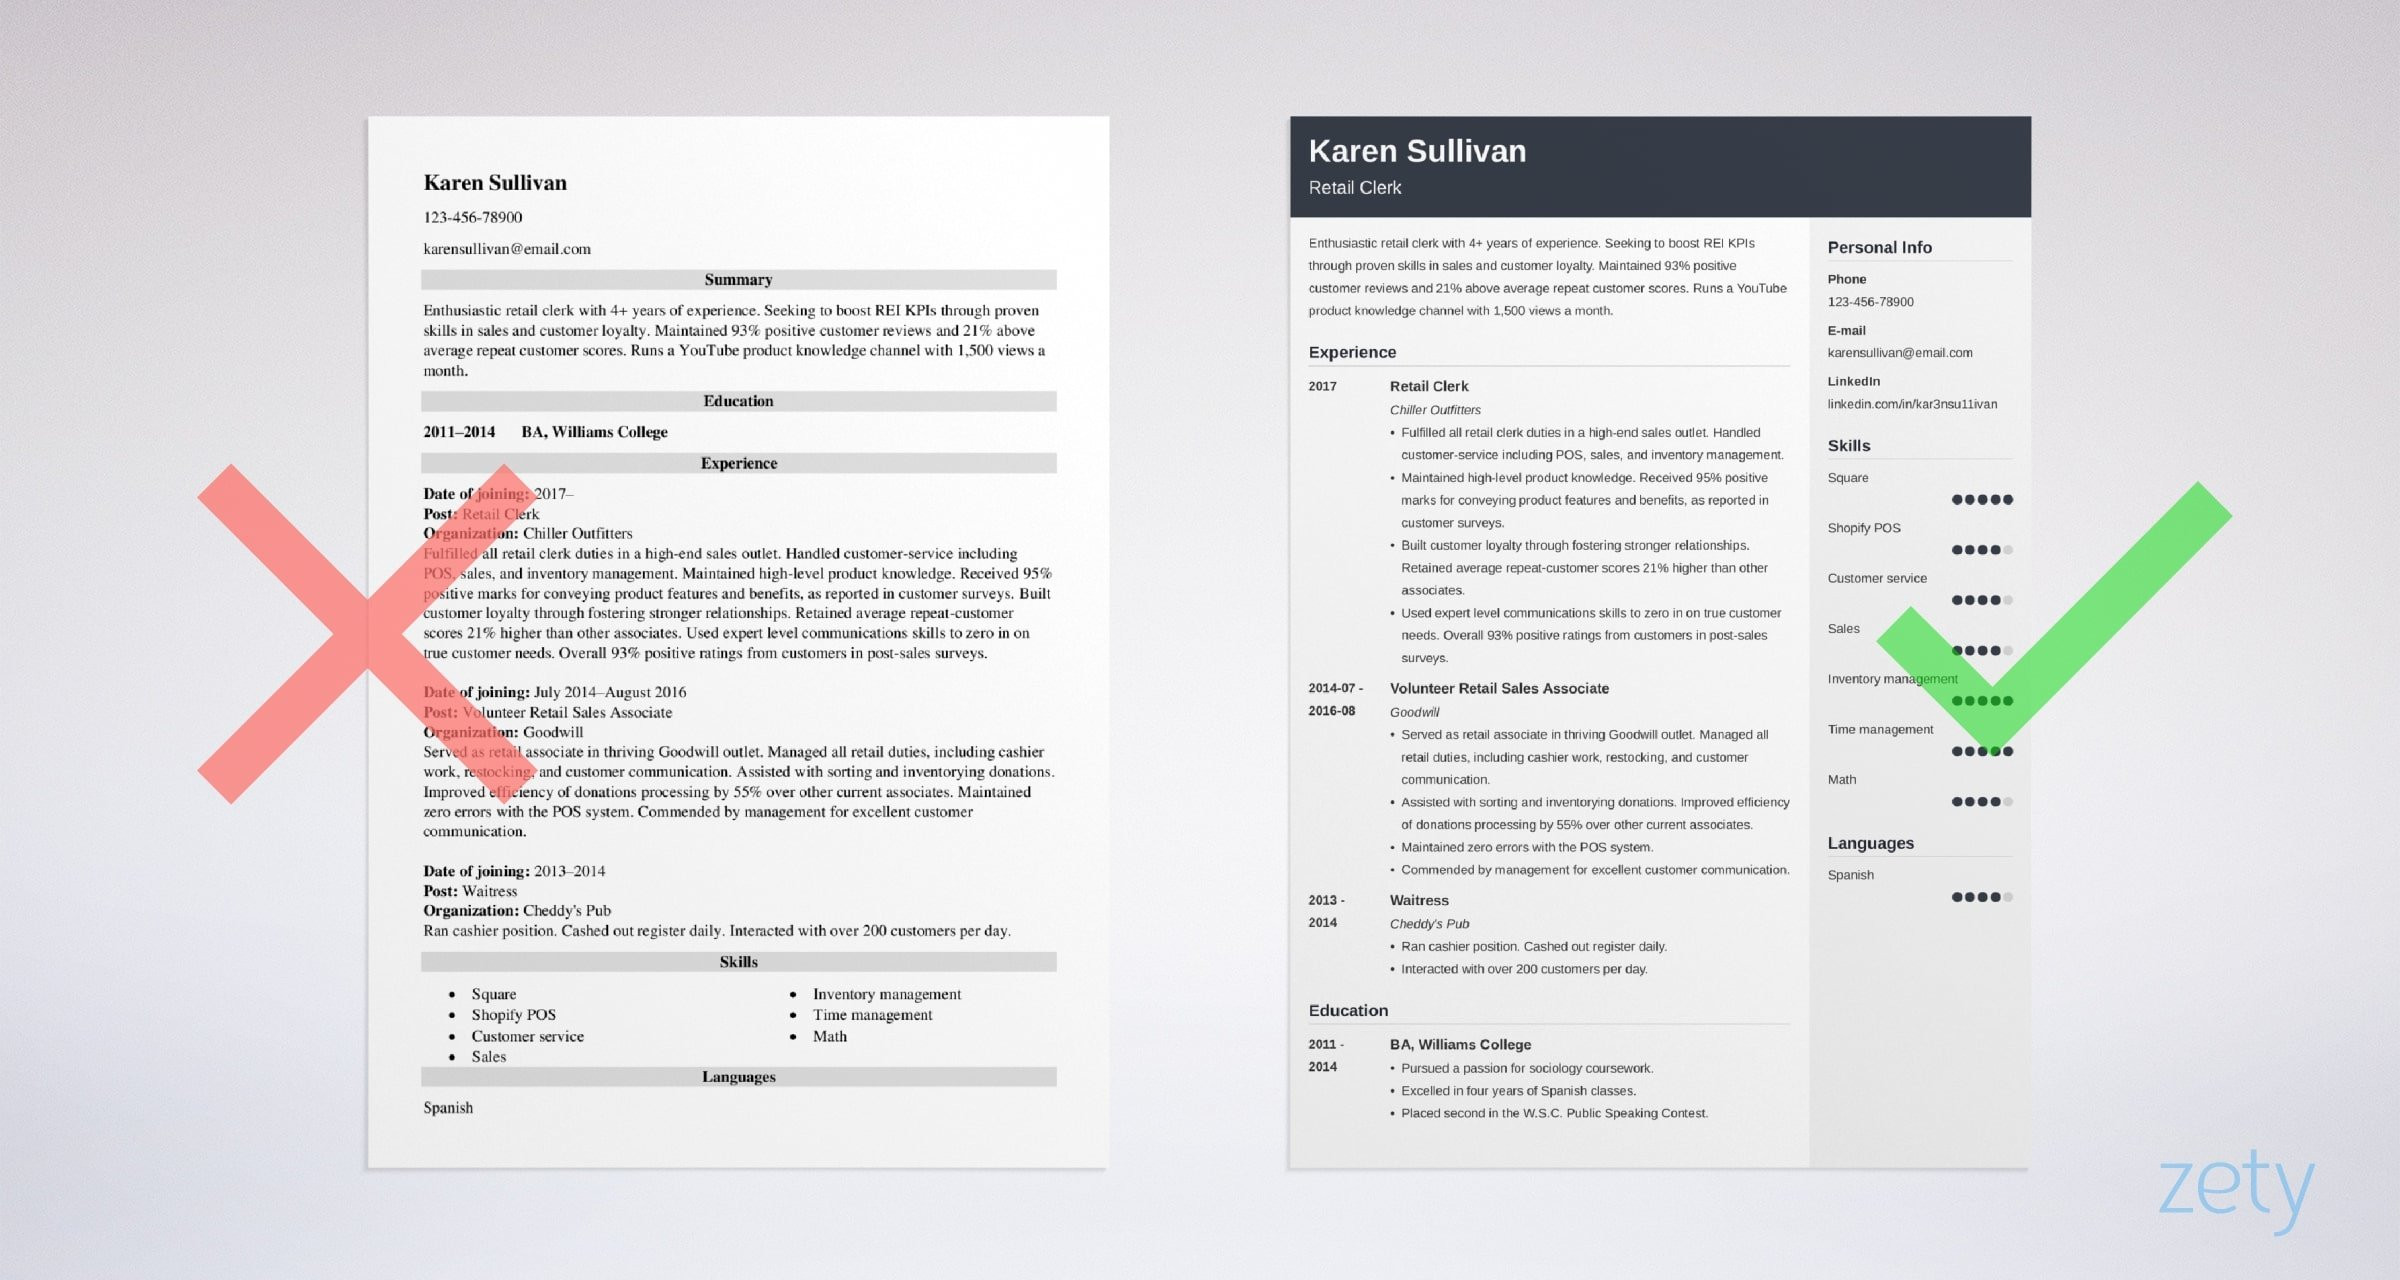 Sample Resume for A Retail Position Retail Resume Examples (with Skills & Experience)